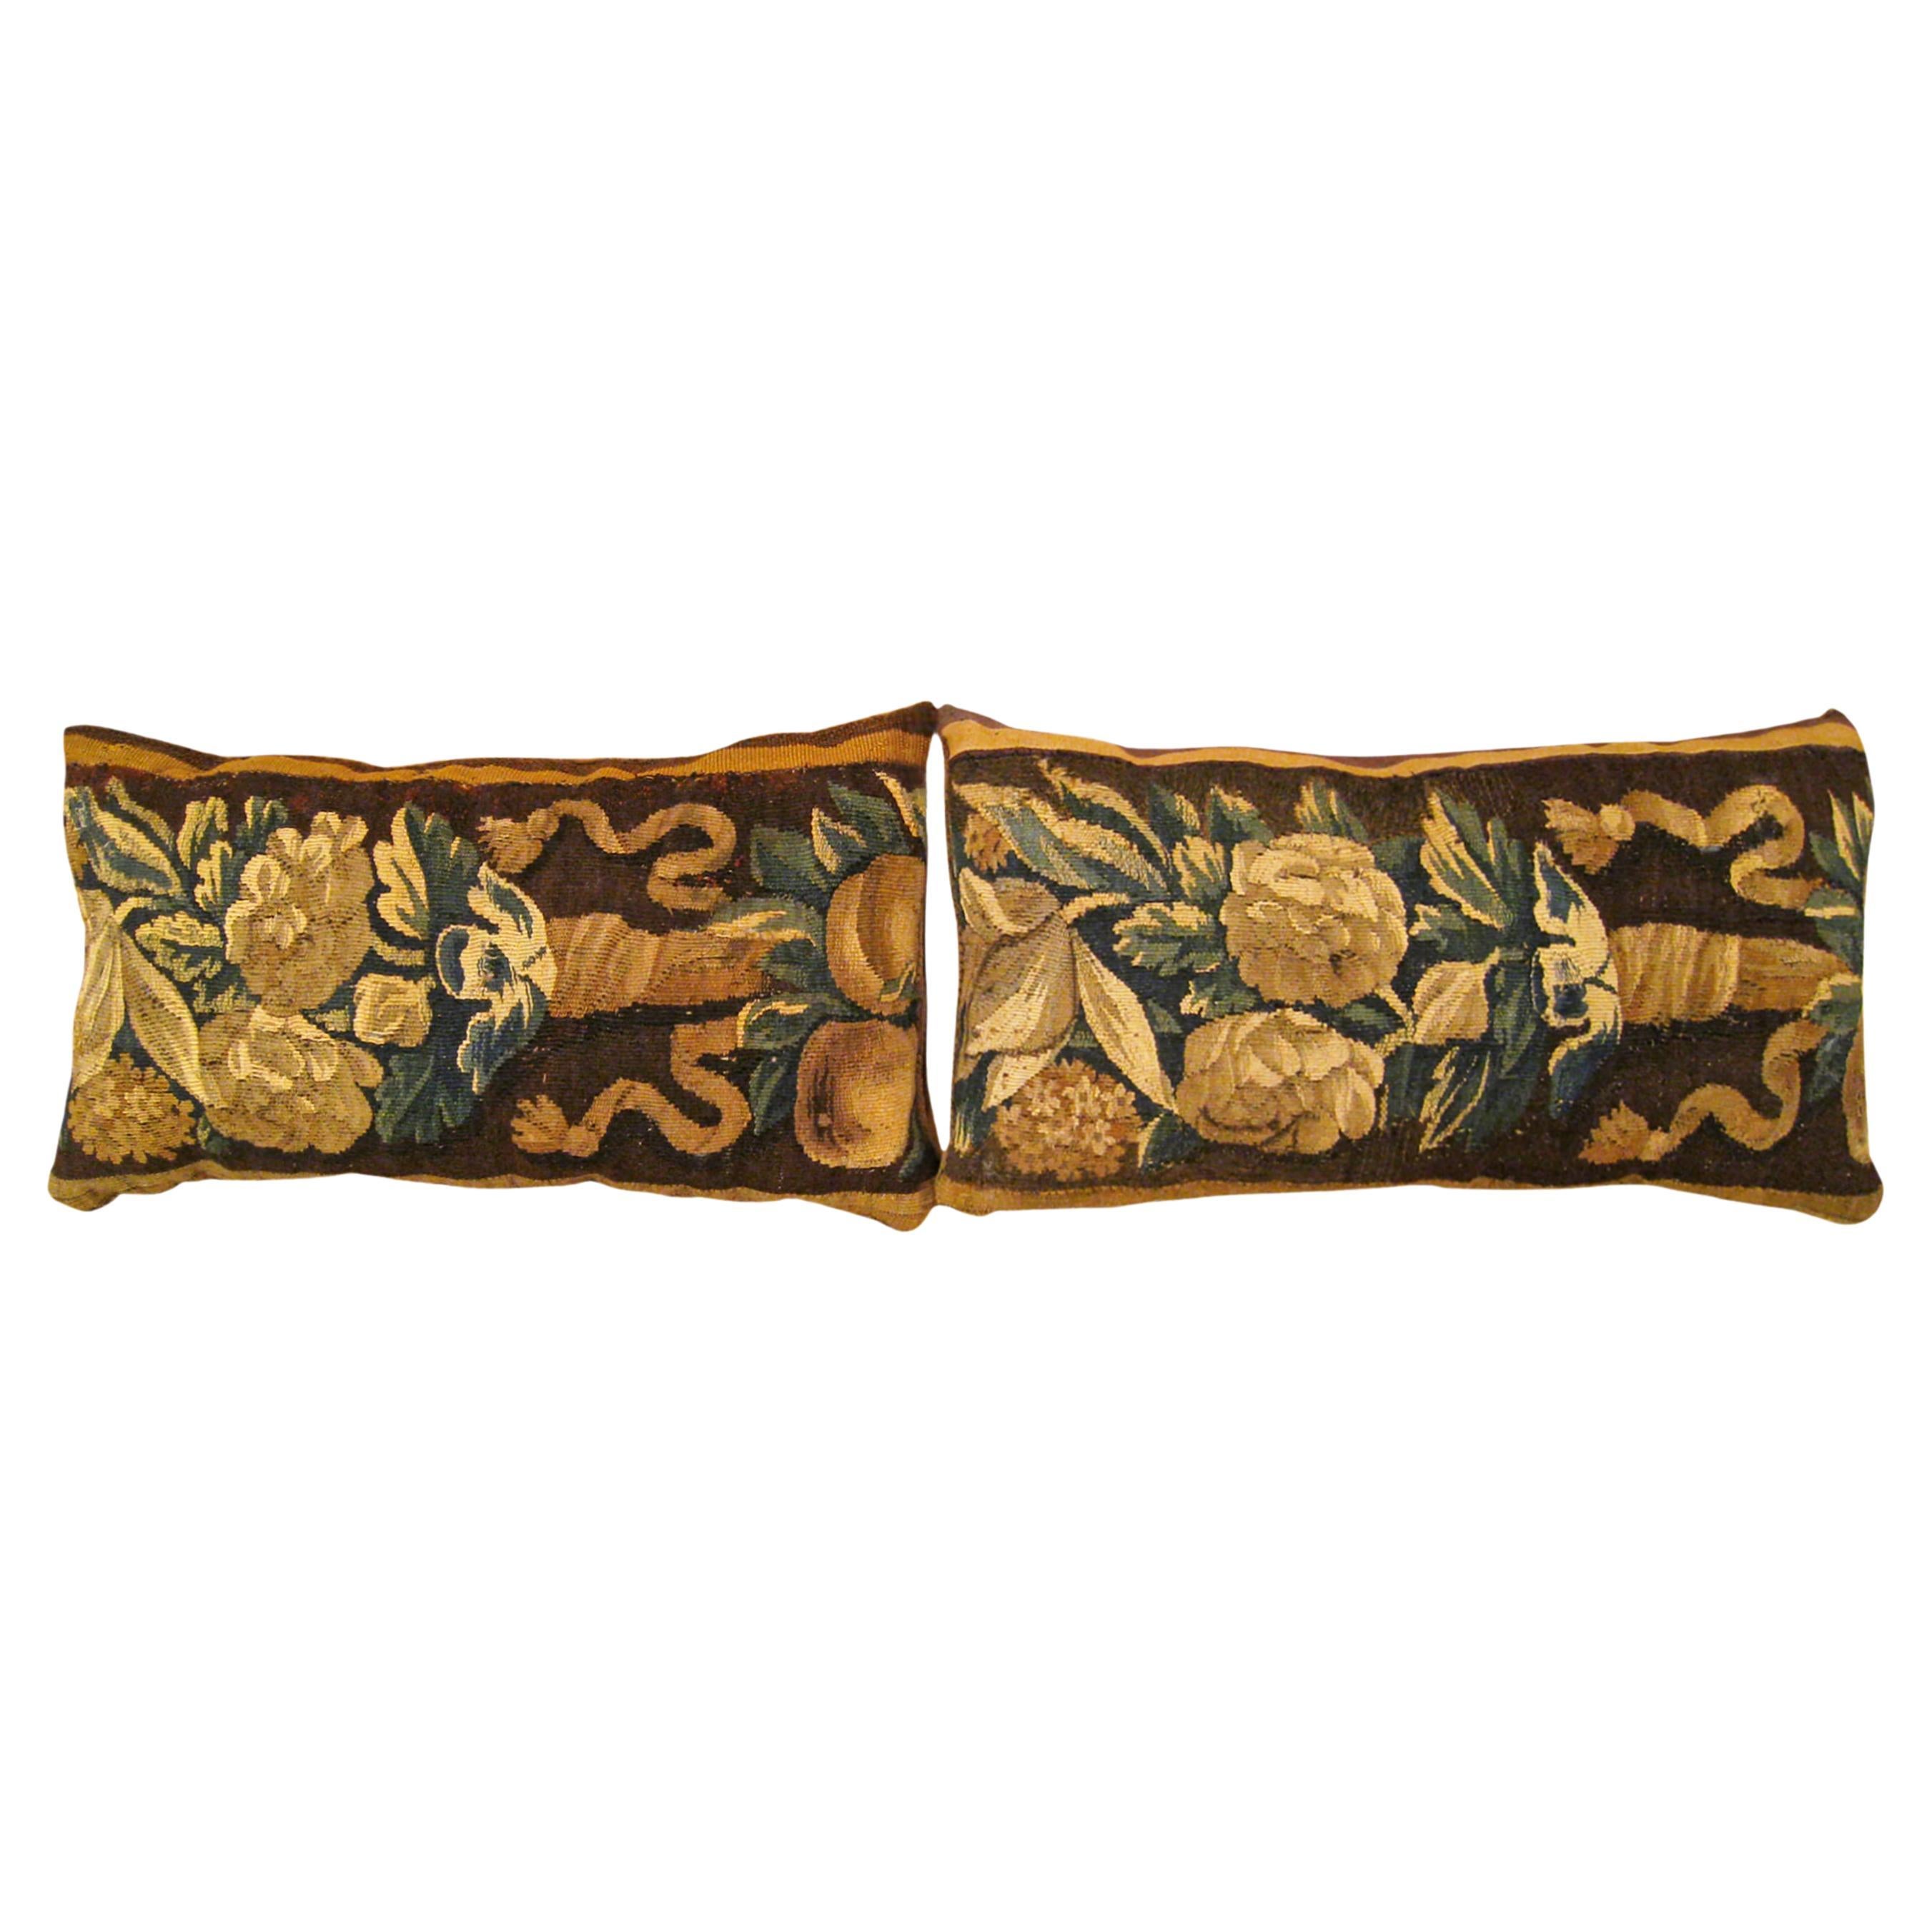 Pair of Decorative Antique 18th Century Tapestry Pillows with Floral Elements